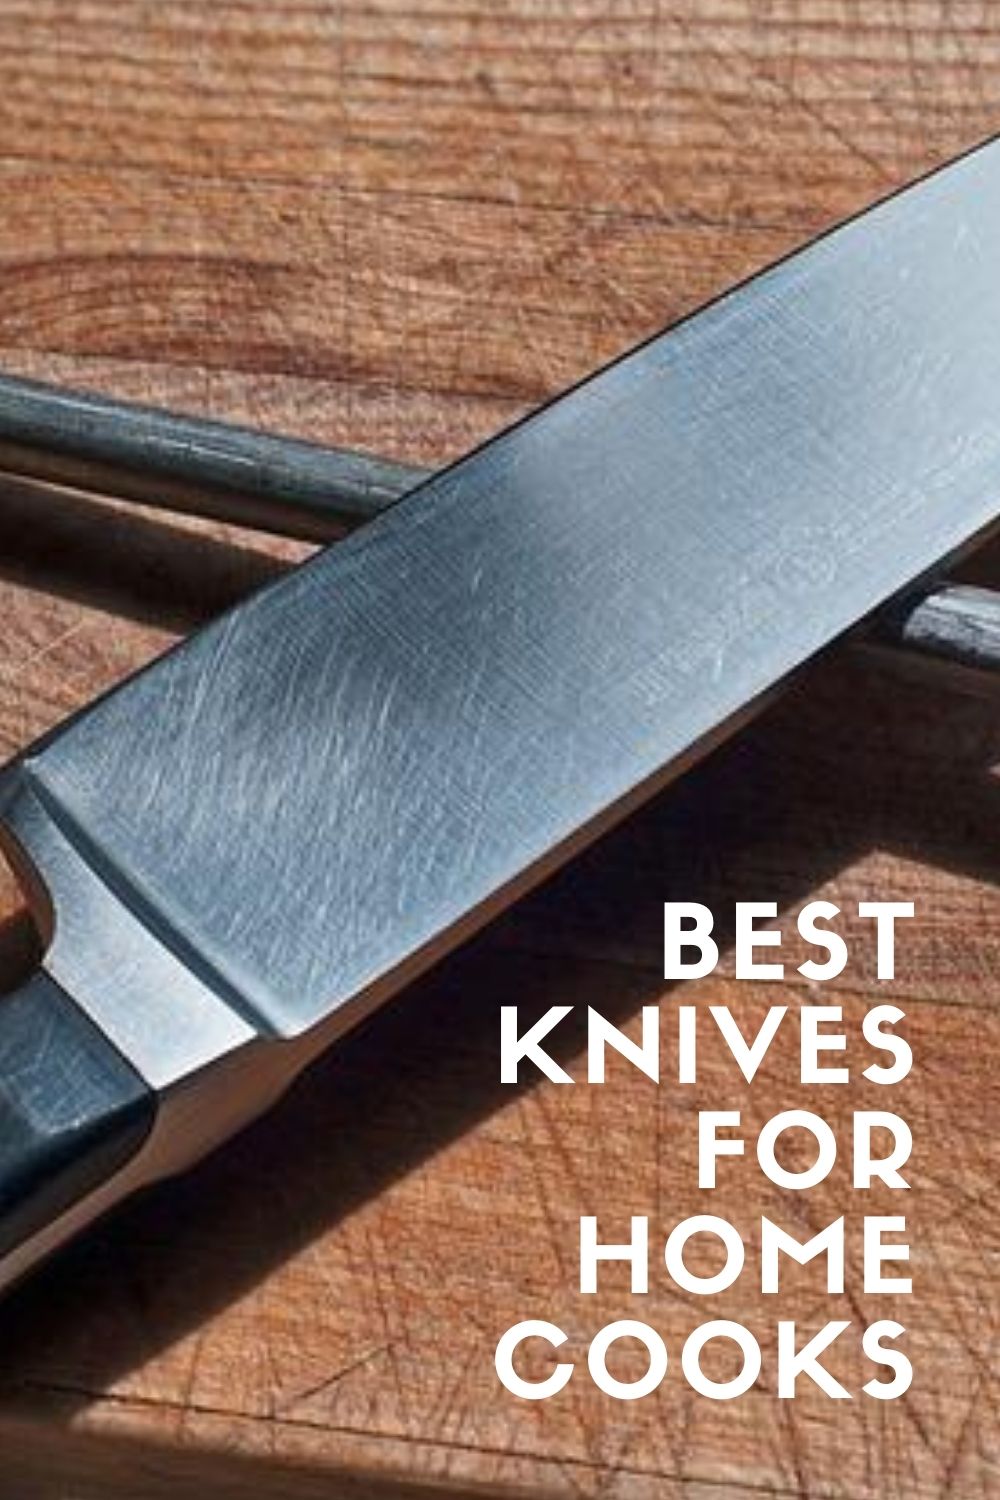 best knives for home cooks graphic